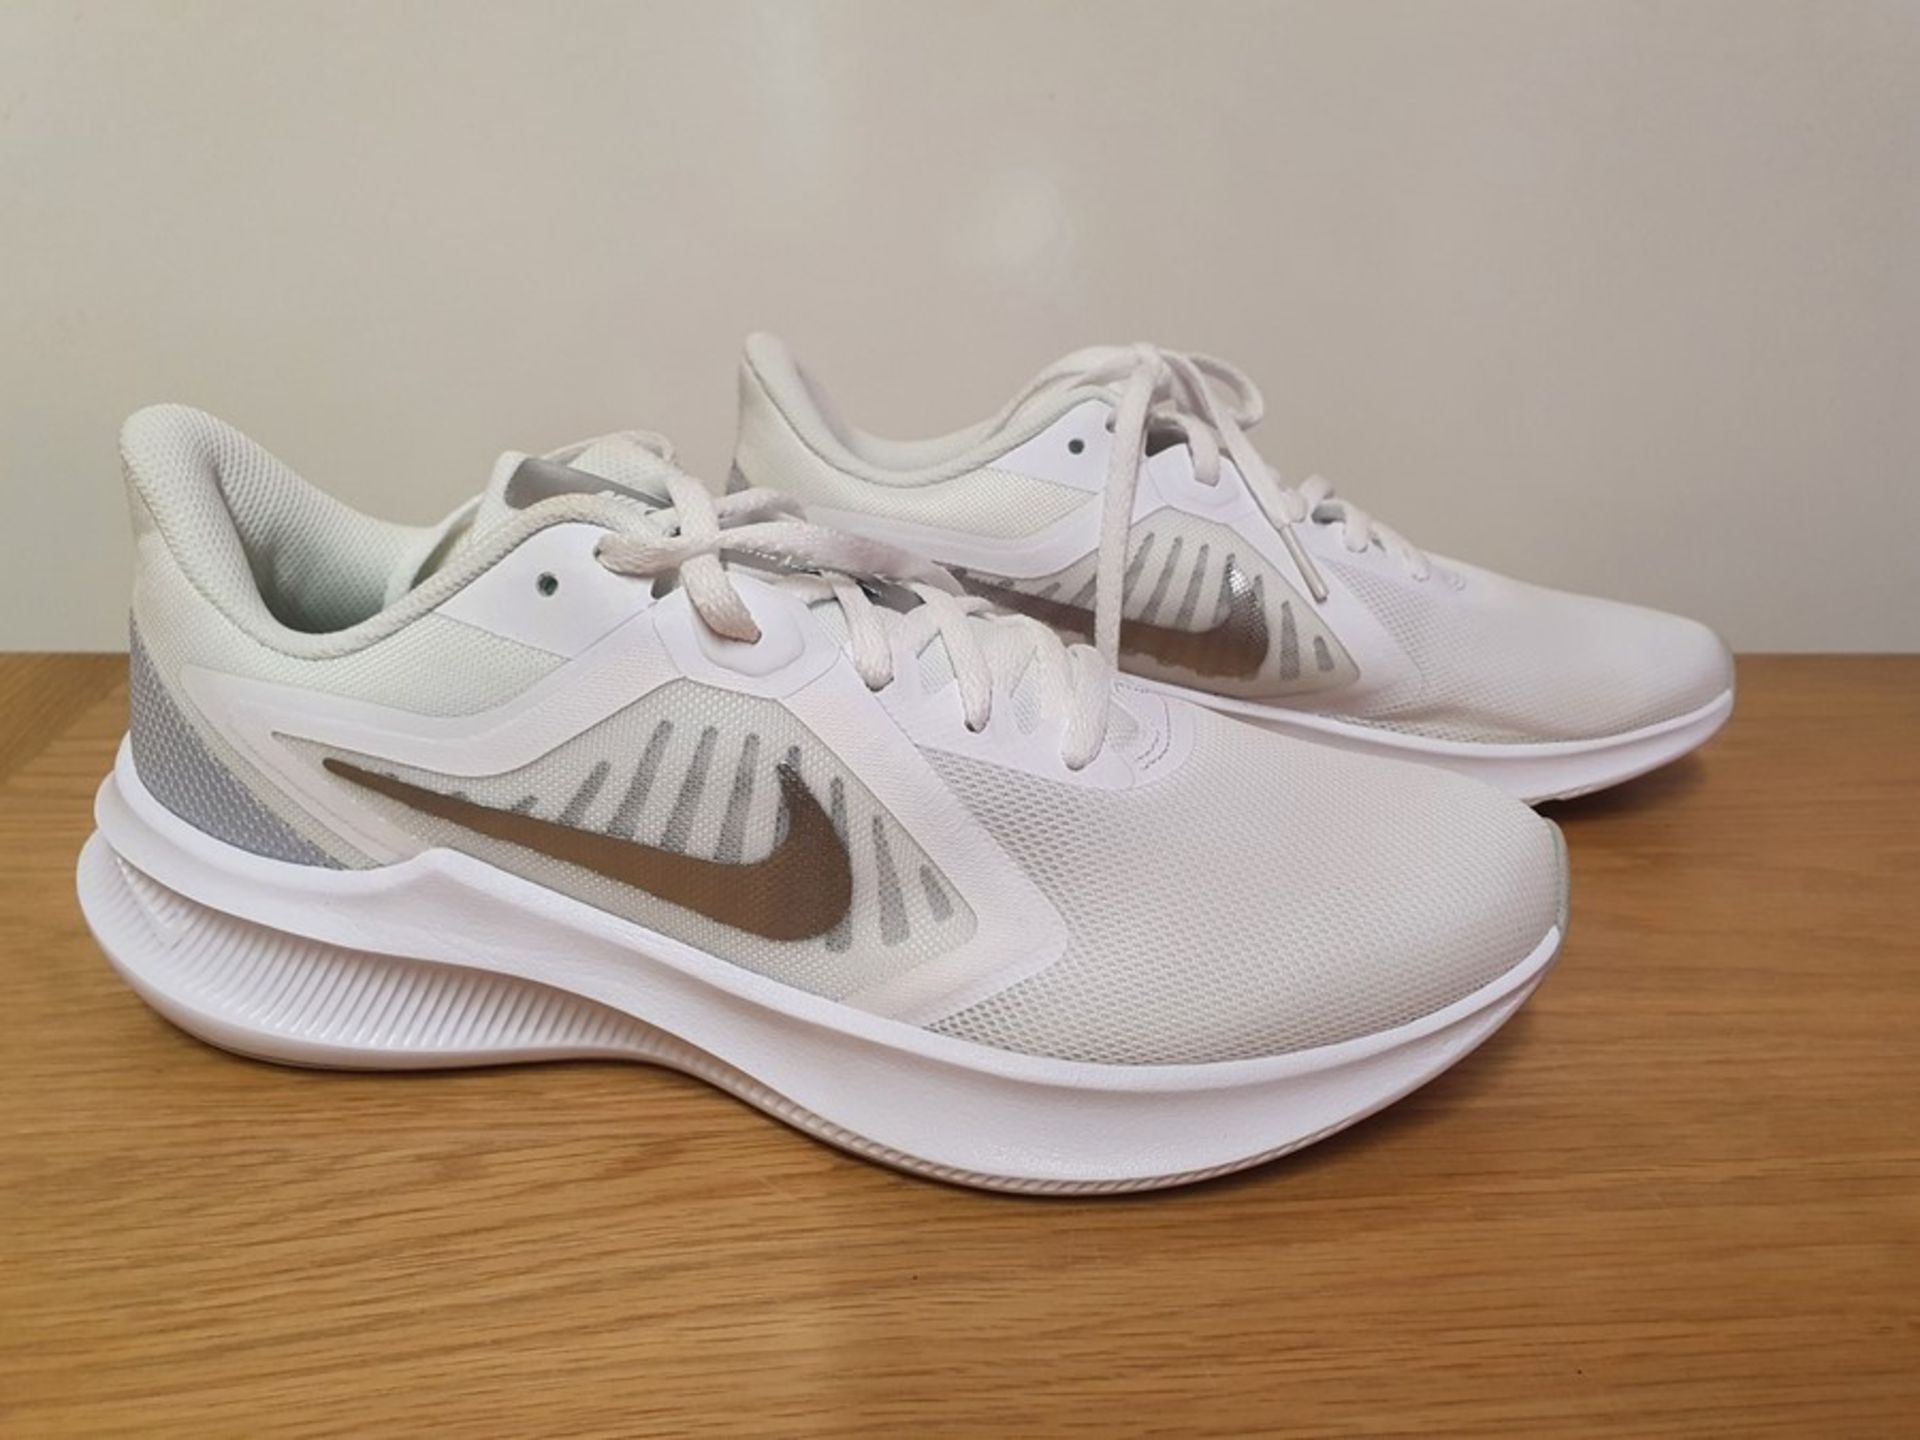 NIKE DOWNSHIFTER 10 RUNNING TRAINERS - WHITE - SIZE: UK 7. GRADE A - AS NEW. RRP £55.00 CUSTOMER